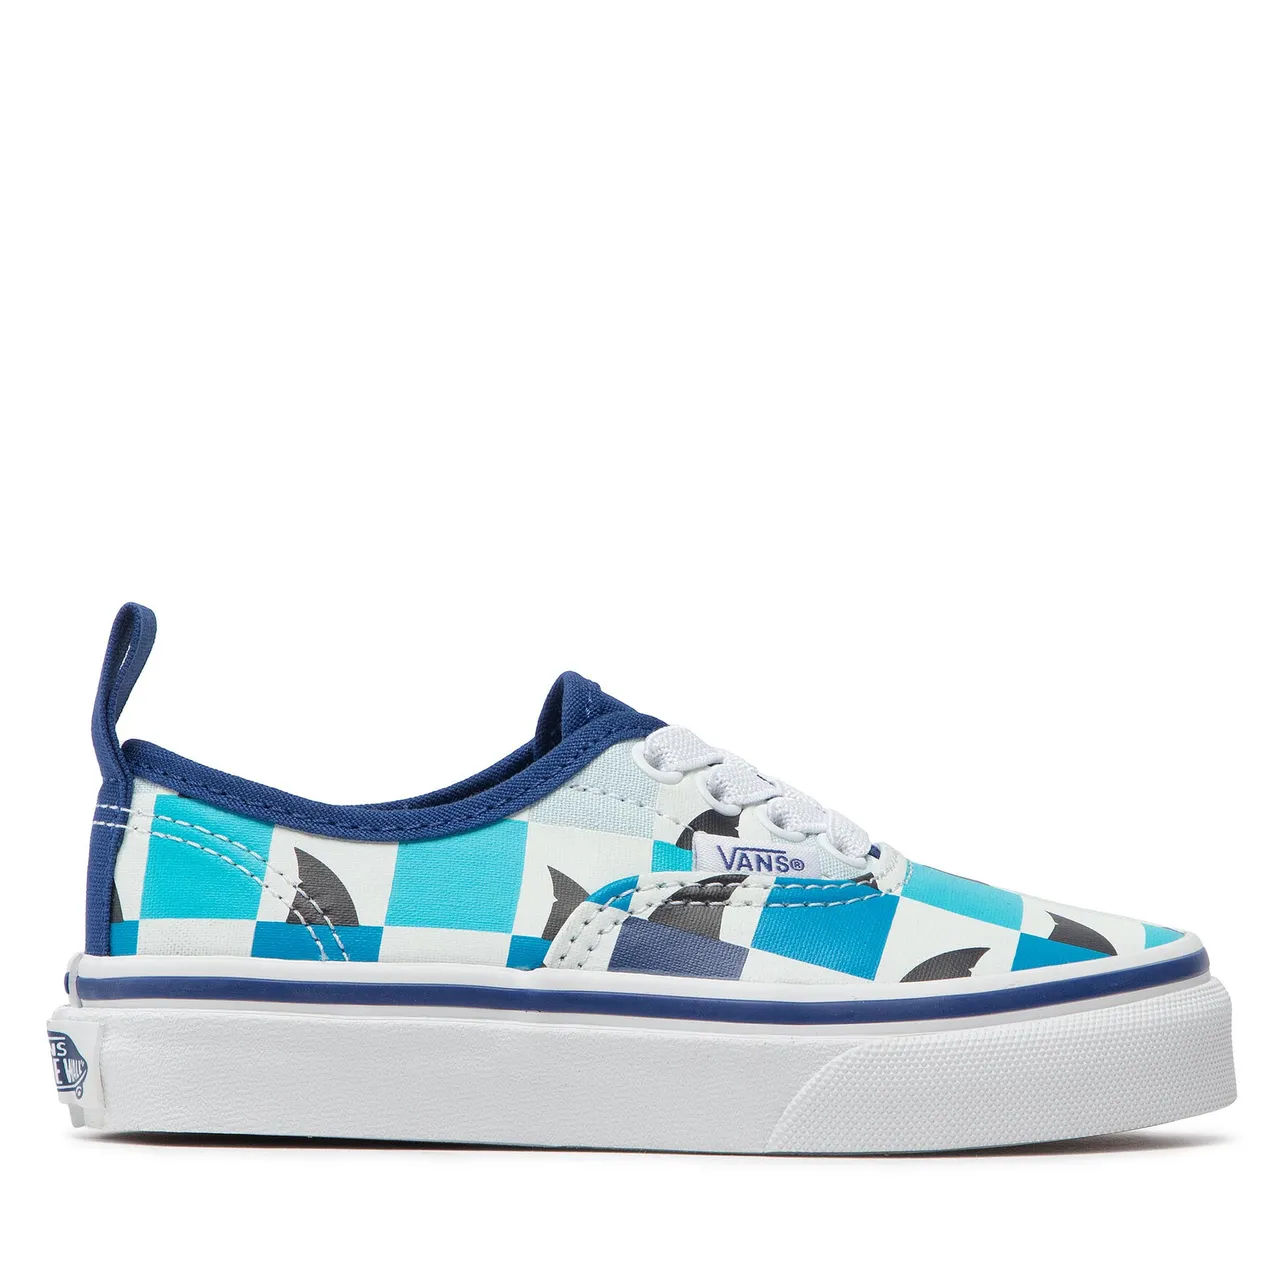 Sneakers aus Stoff Vans Authentic Elas VN0A4BUSABQ1 (Glow Checkerboard Sharks)